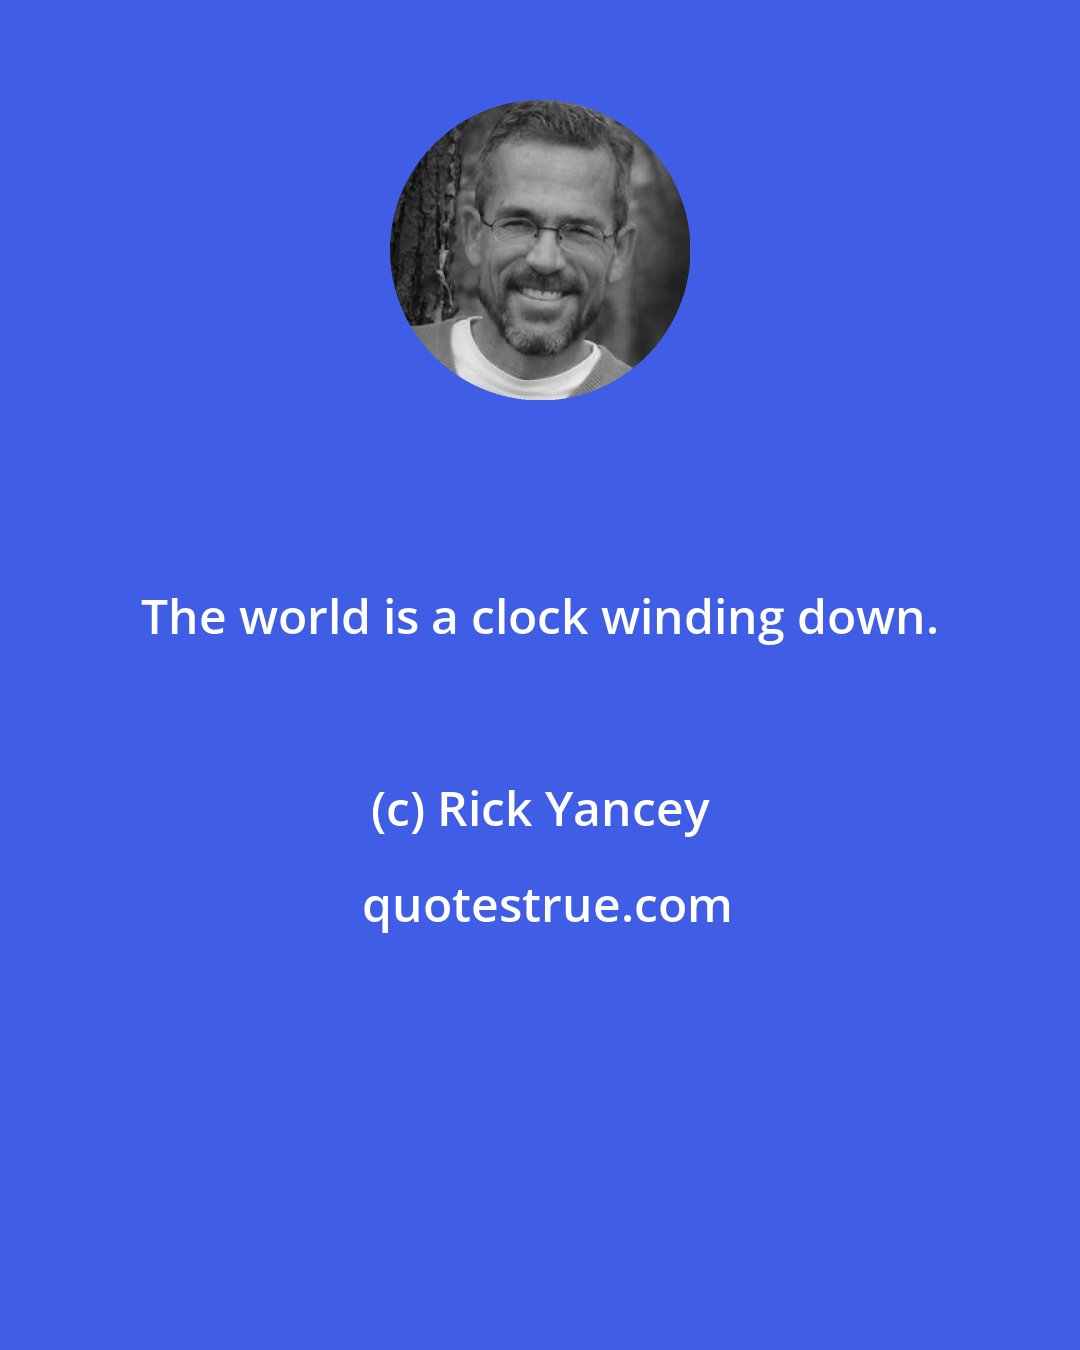 Rick Yancey: The world is a clock winding down.